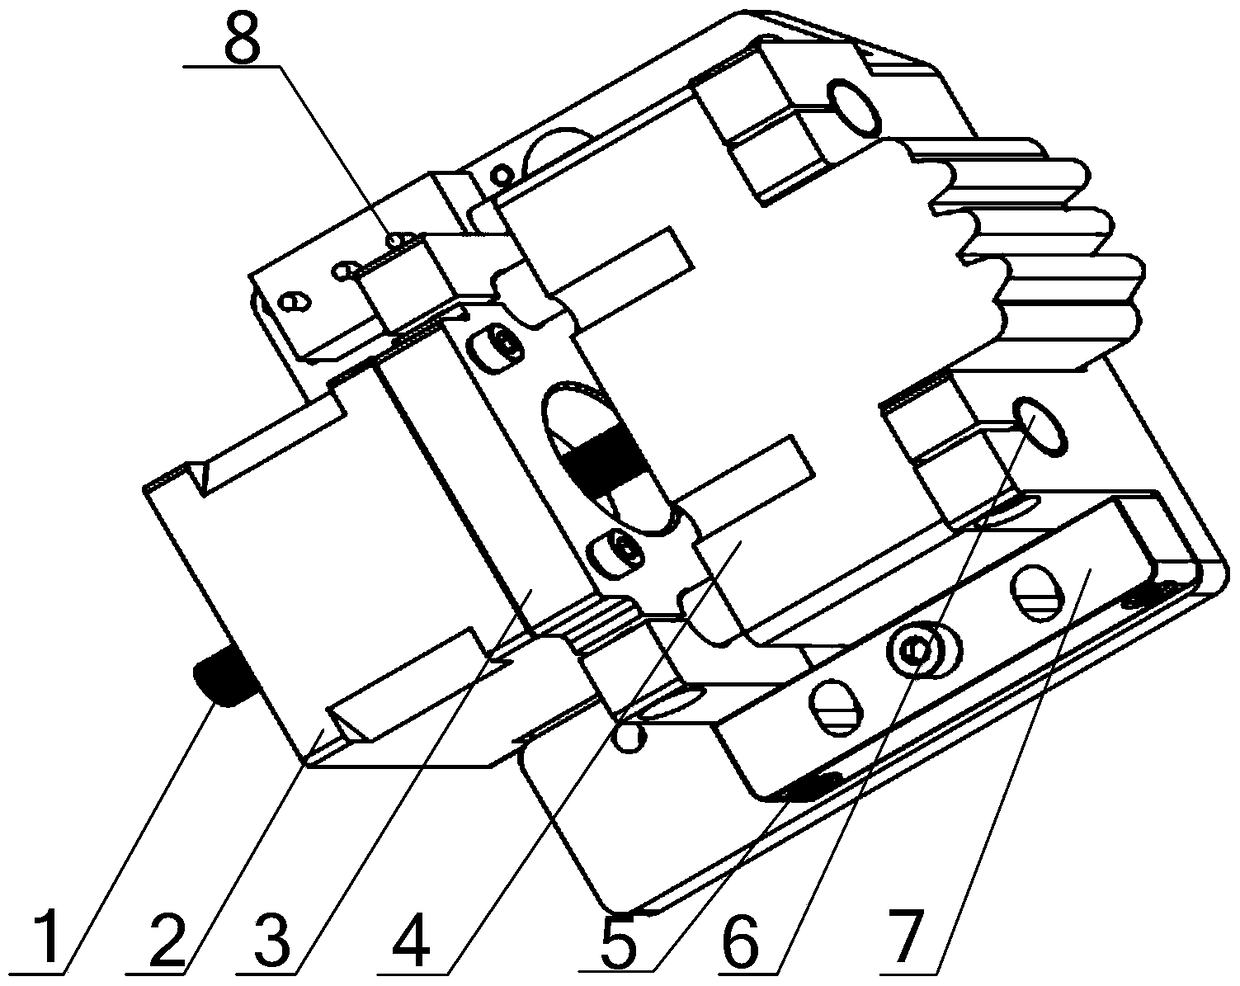 A shaft locking device for a transmission mechanism